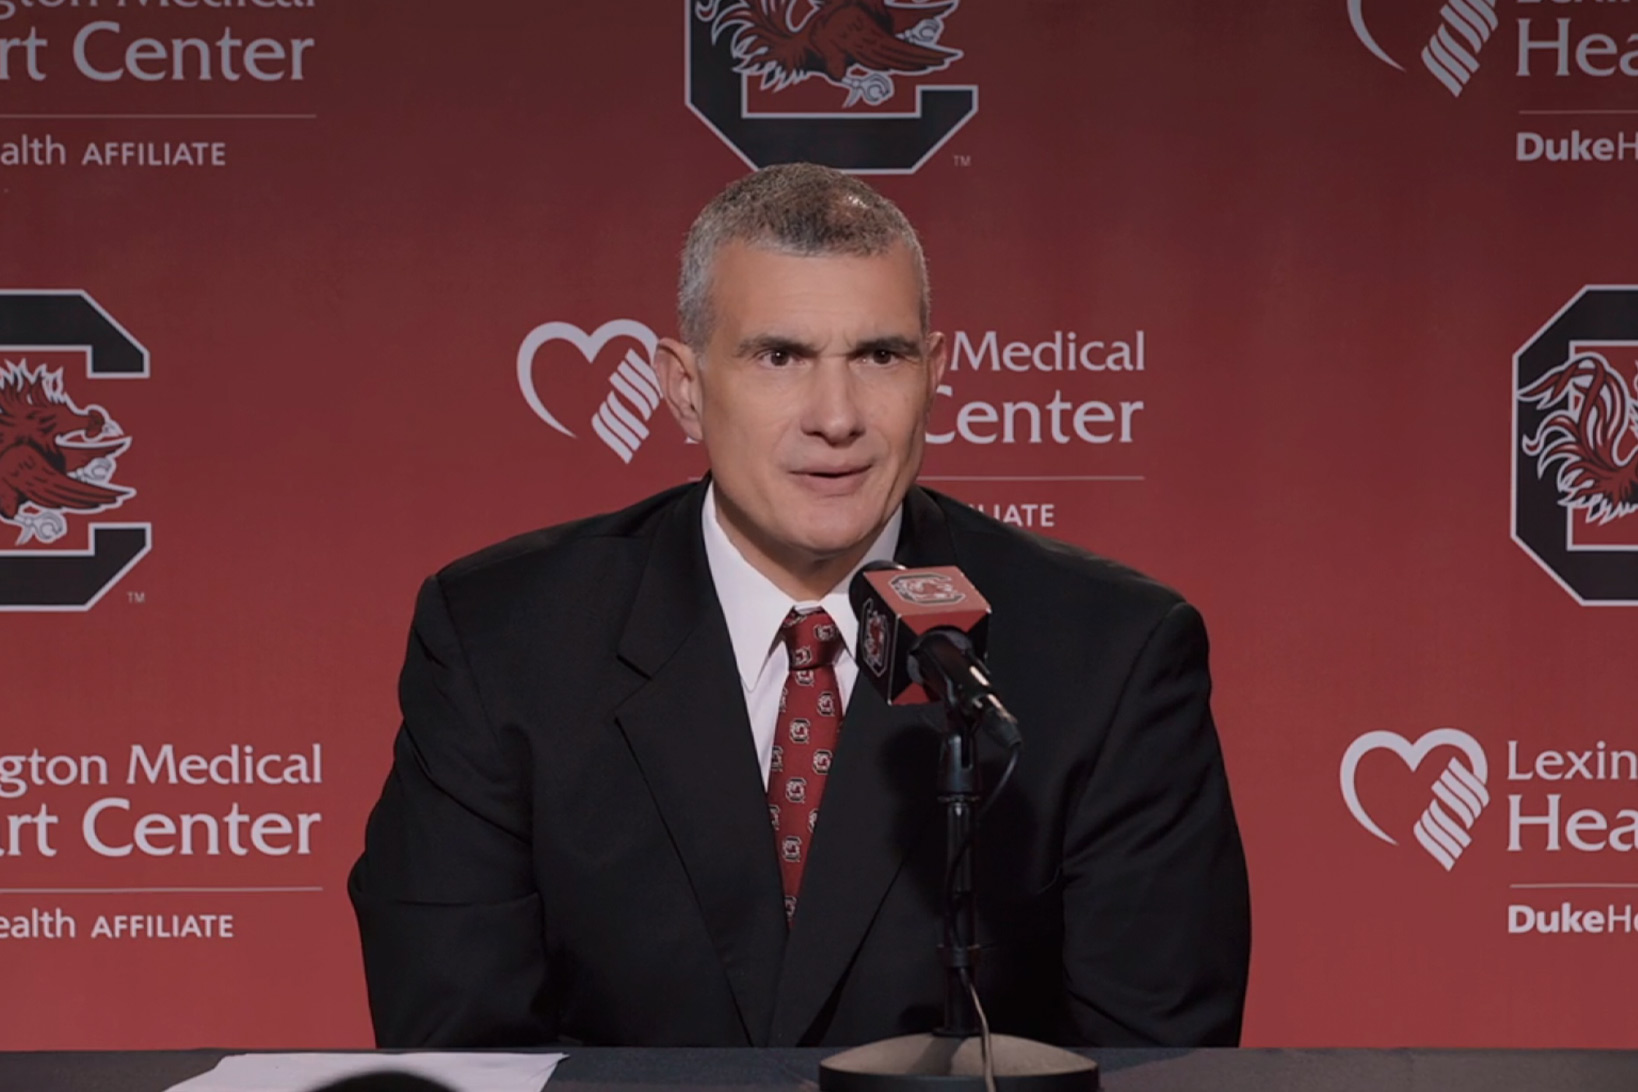 UofSC basketball coach Frank Martin in a suit at a press conference, sitting in front of a garnet microphone against a background with the UofSC logo and the Lexington Medical Heart Center logo.